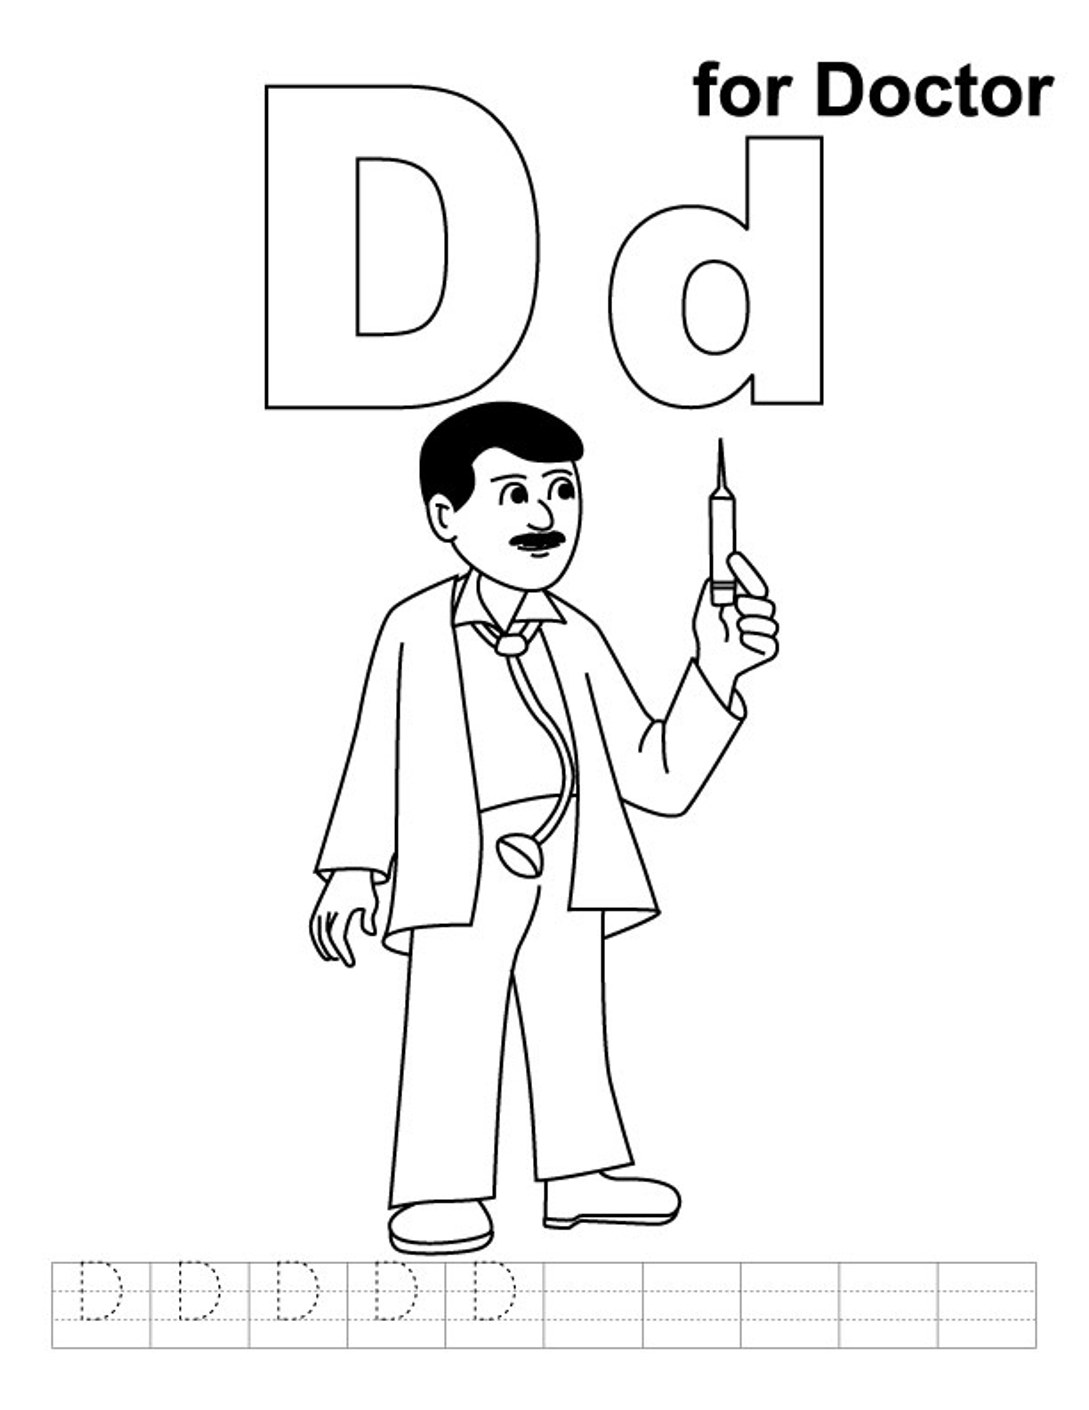 Doctor coloring pages to download and print for free